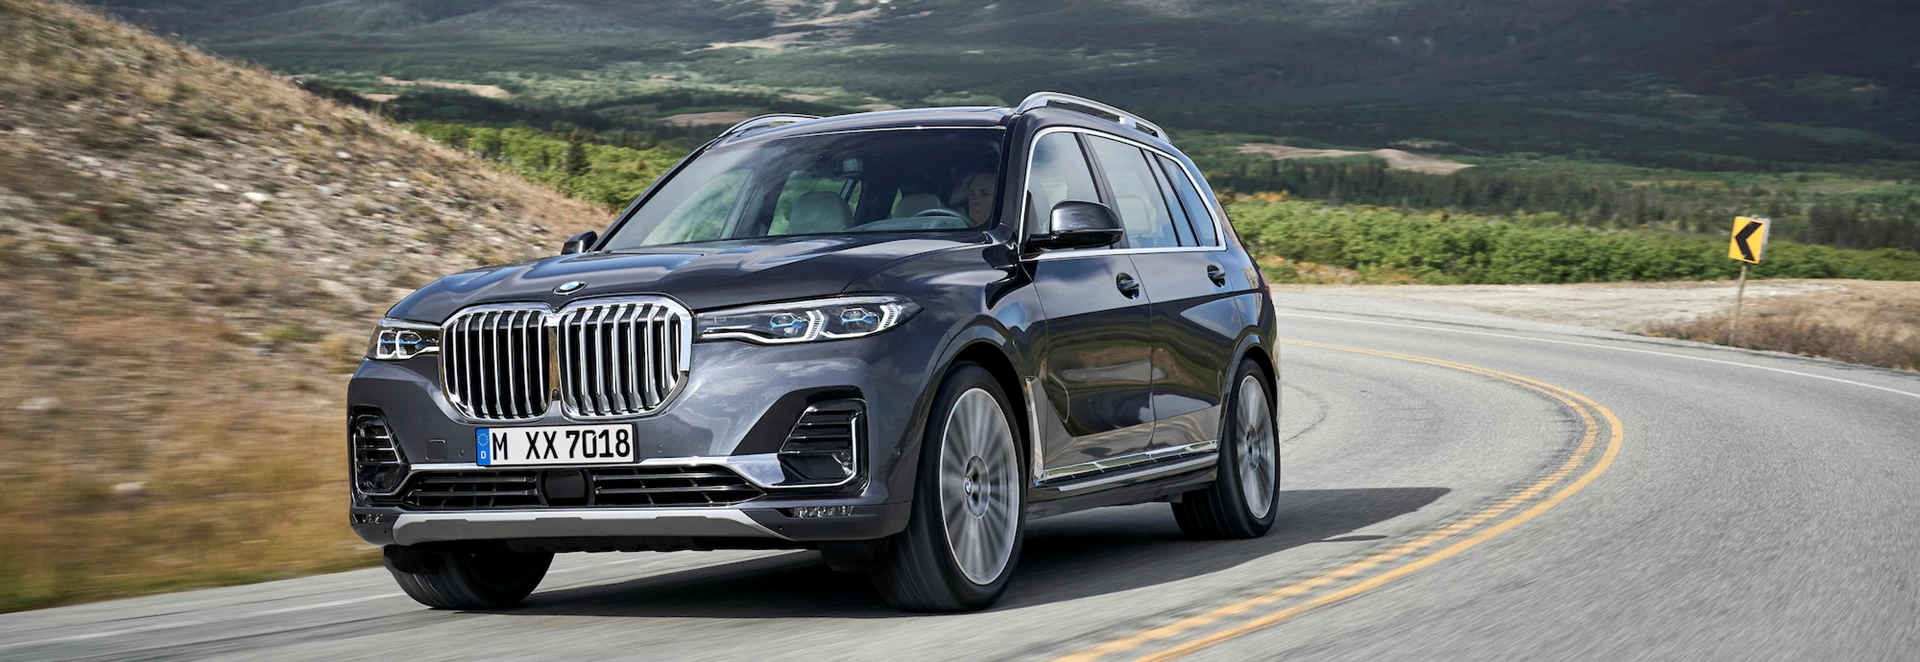 2019 BMW X7: Biggest beast in the BMW lineup